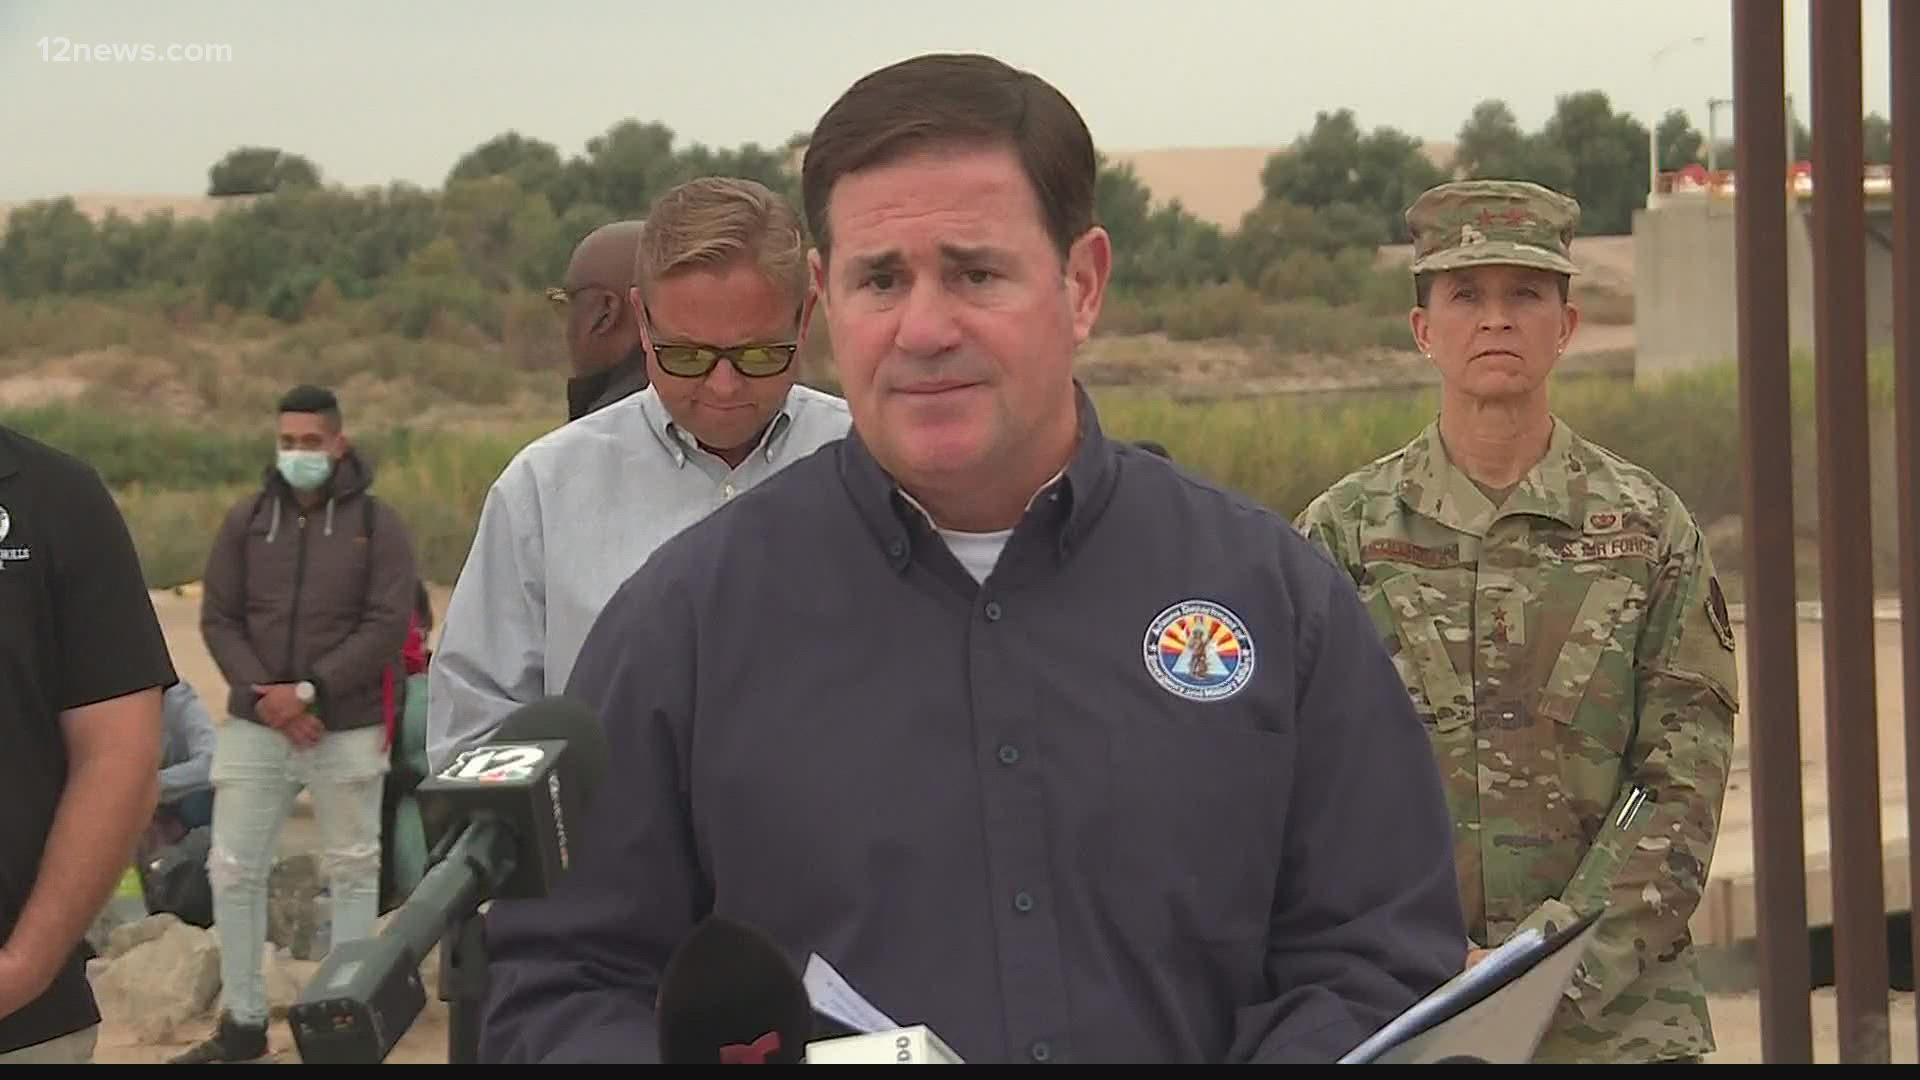 Arizona Gov. Doug Ducey traveled to Yuma Tuesday where Border Patrol has seen a large increase in the number of migrants crossing the border in southwestern Arizona.